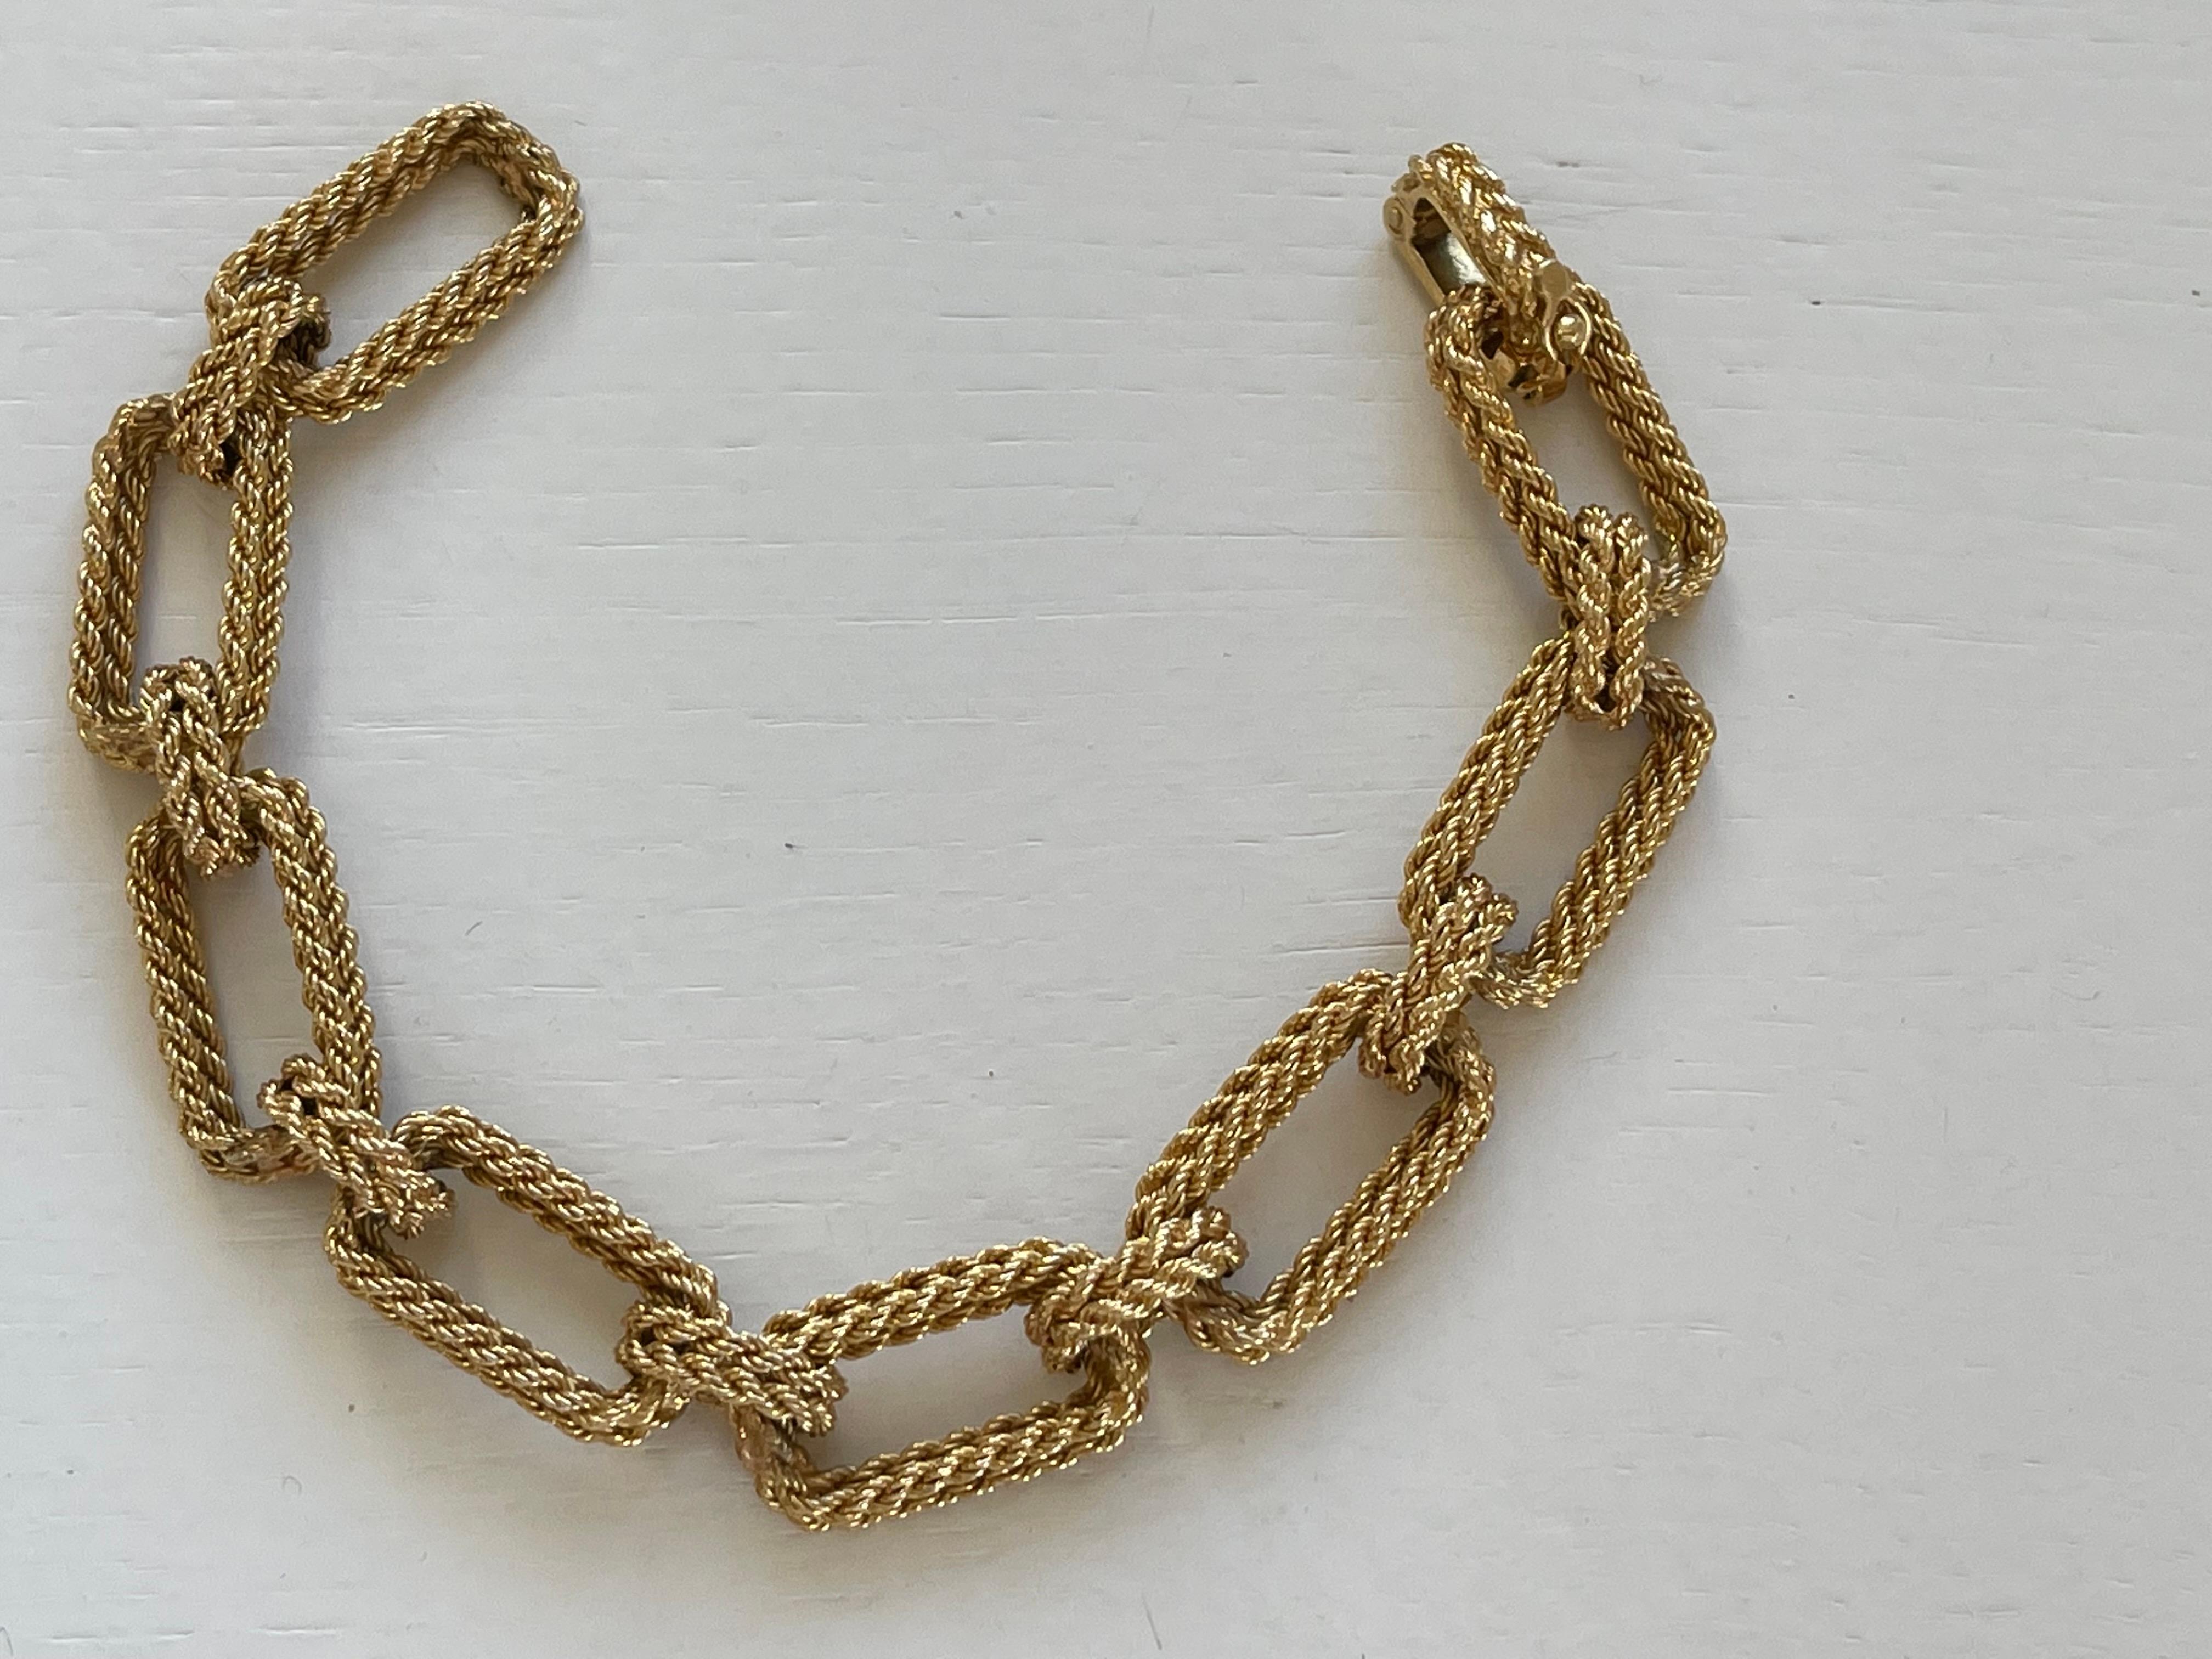 Vintage 18 K yellow Gold link bracelet with a length of 20 cm. You could easily add charms if desired. The individual link is 1.25 cm wide and 2.3 cm long. 
Rectangular, bold solid gold links bracelets are very much en Vogue! Wear this bracelet with